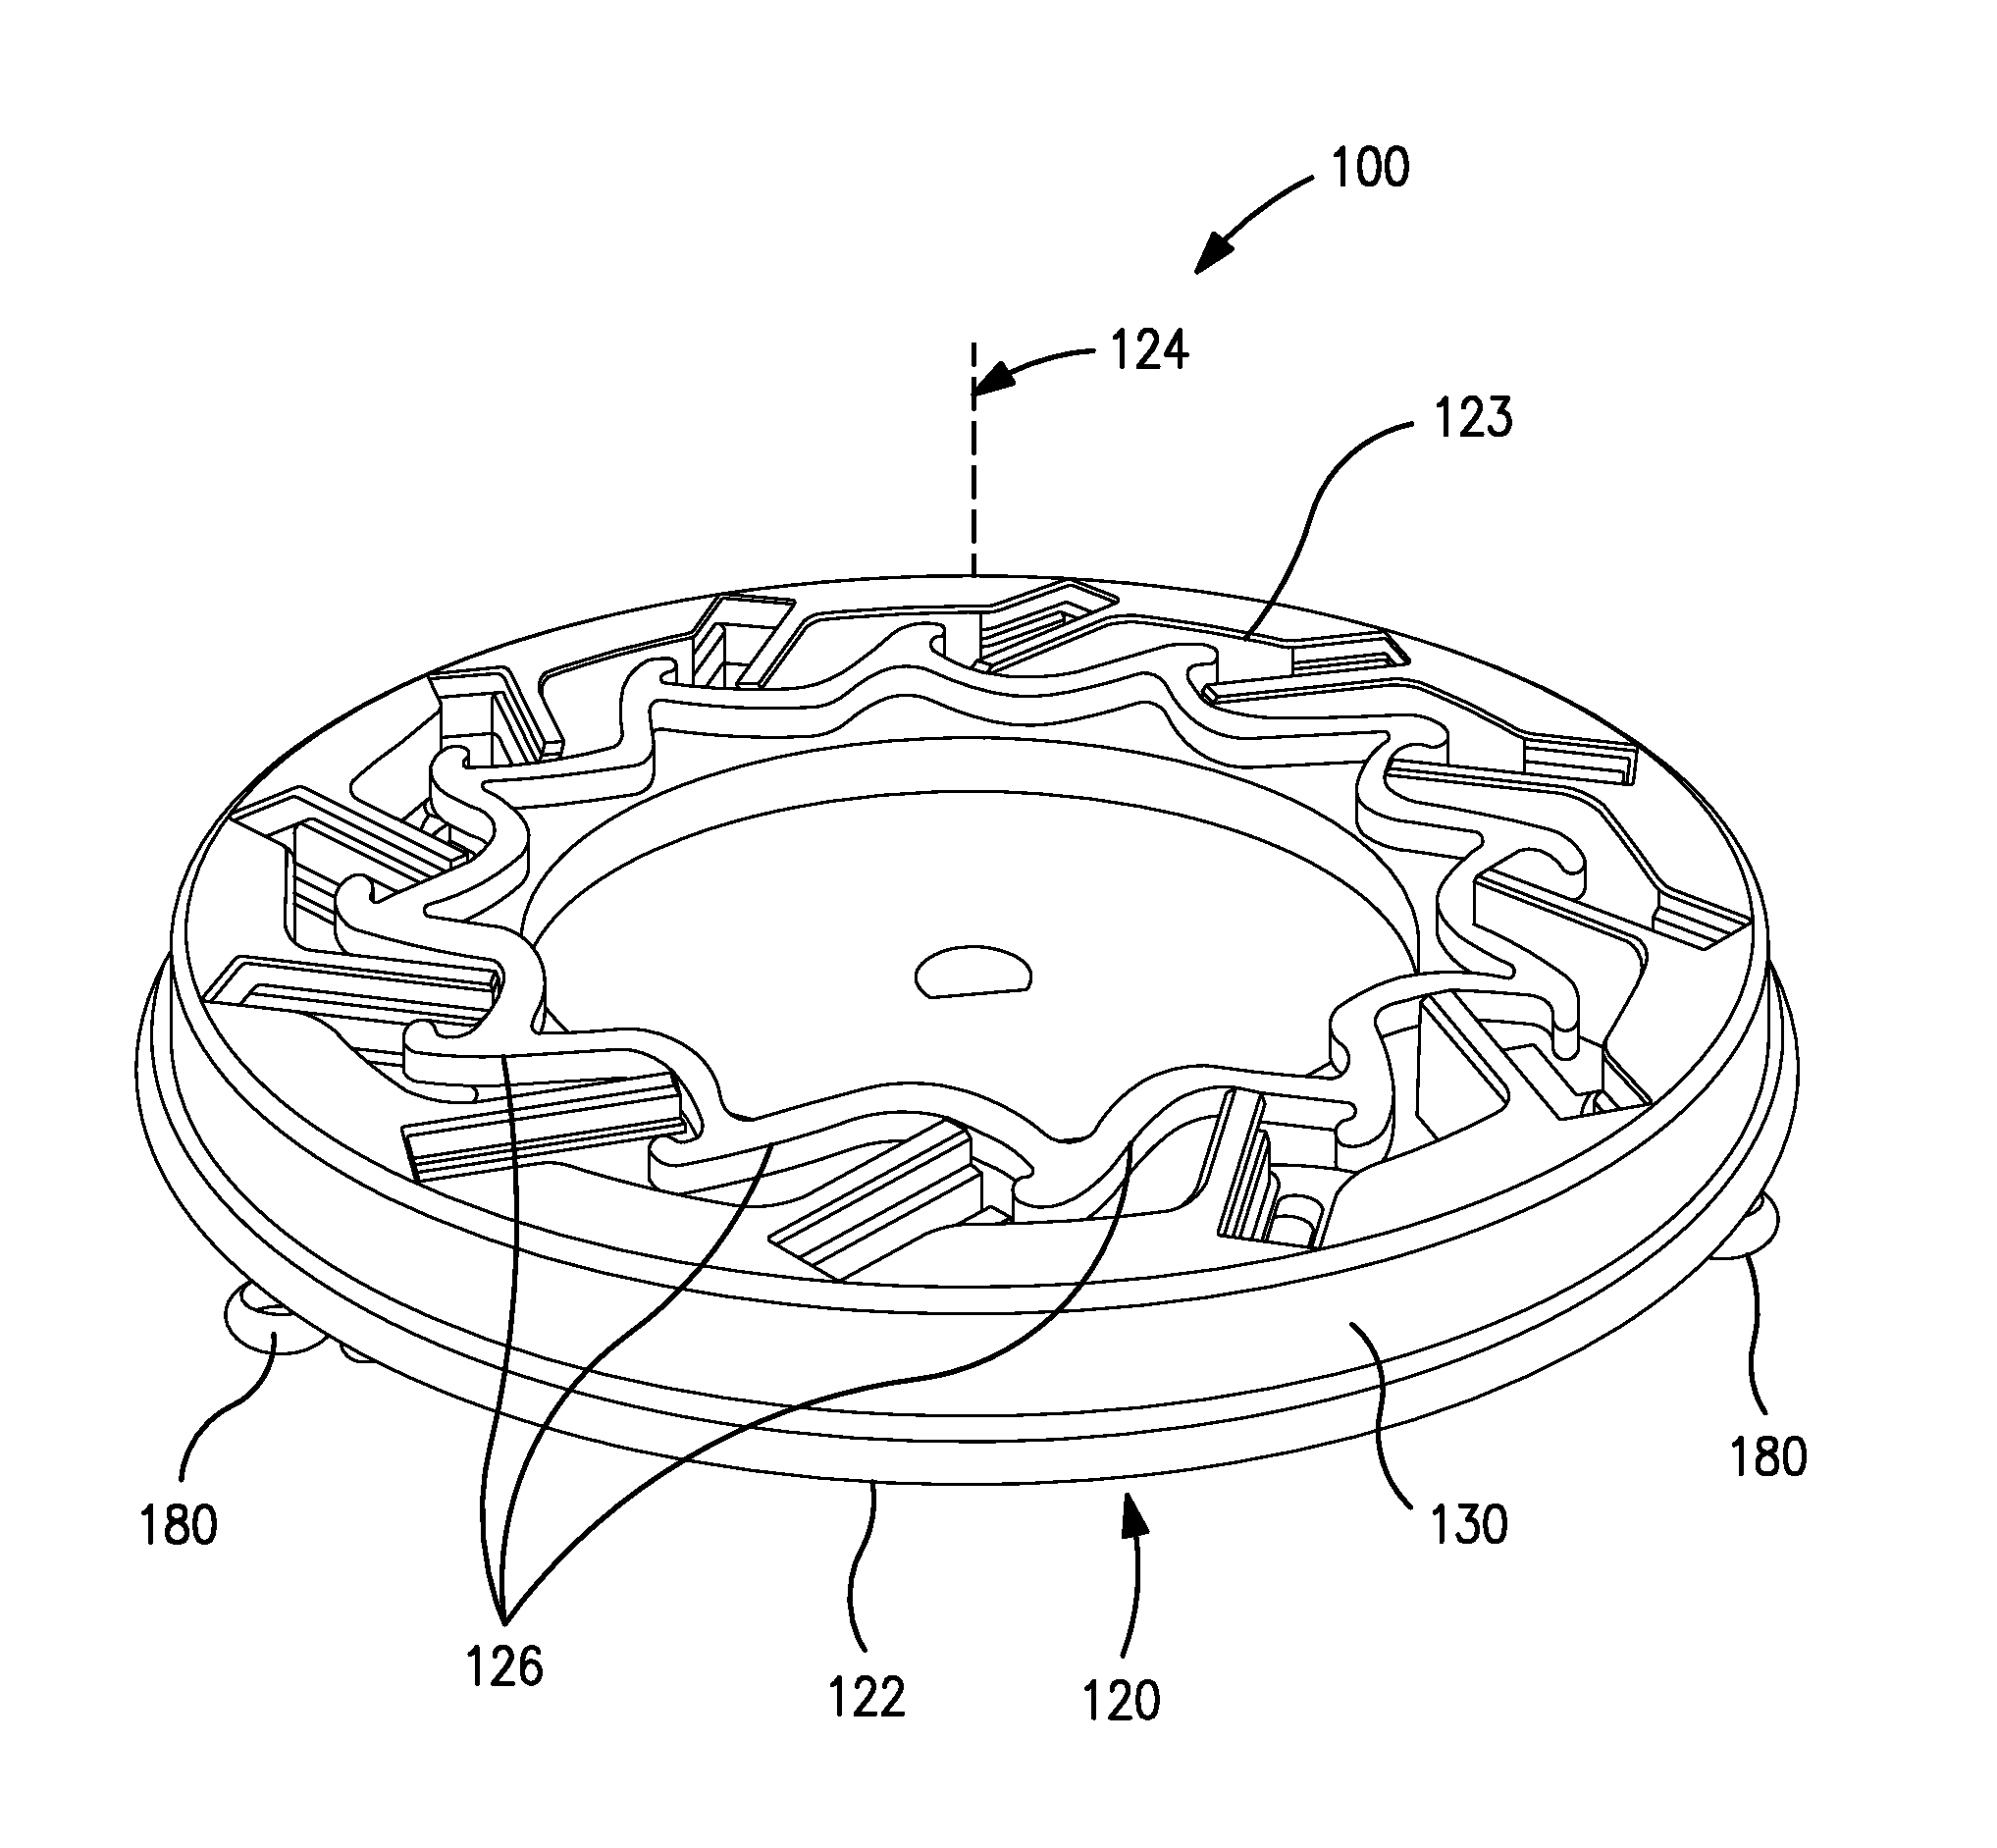 Multifunction tooling fixture assembly for use in a coating related operations